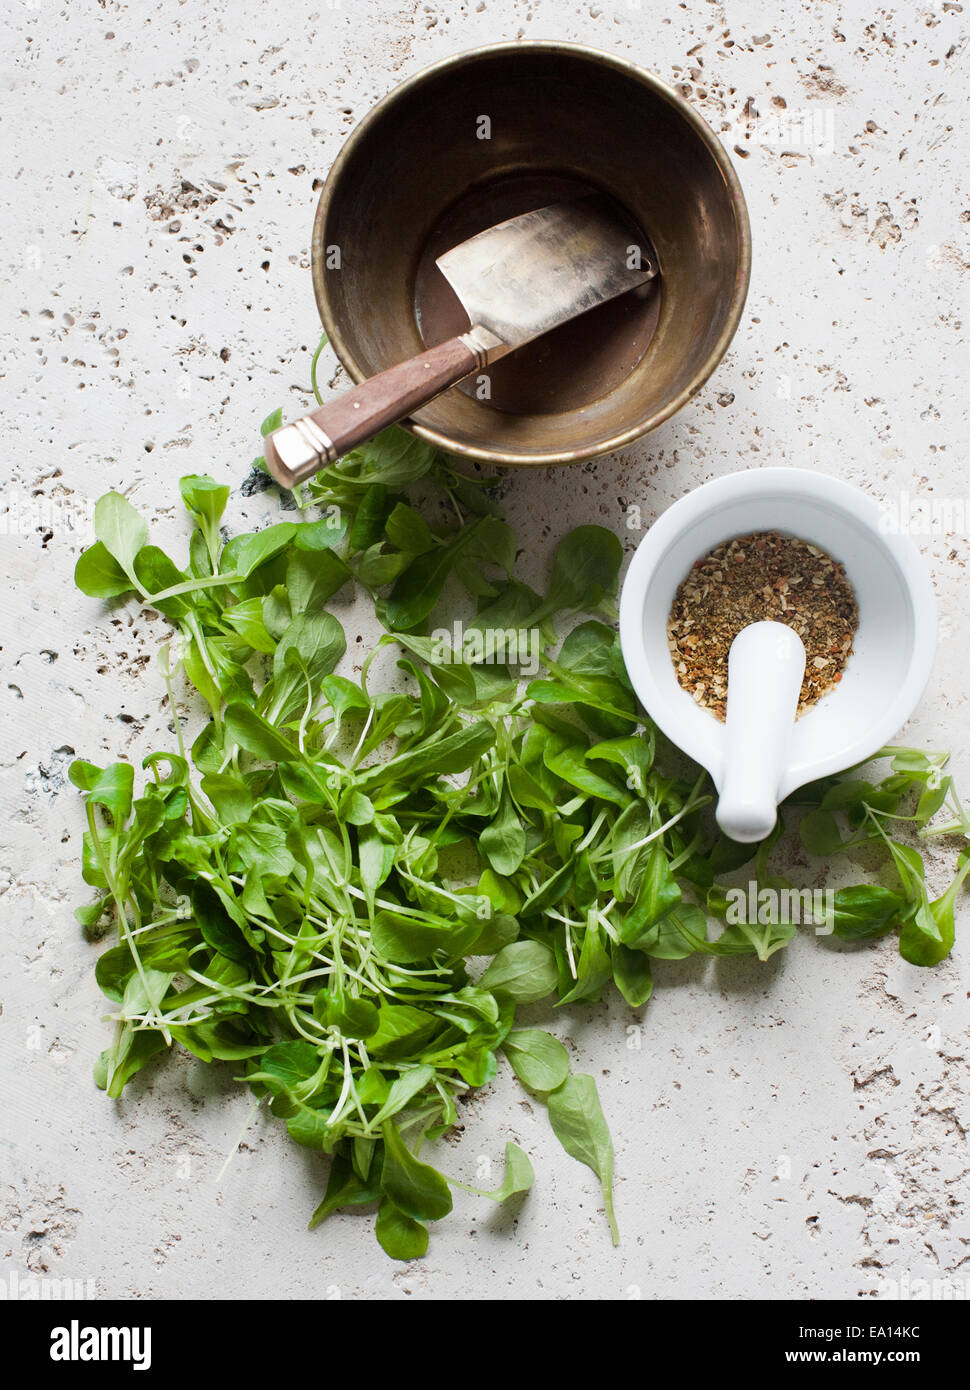 Salad leaves, chopper and pestle and mortar with spices Stock Photo